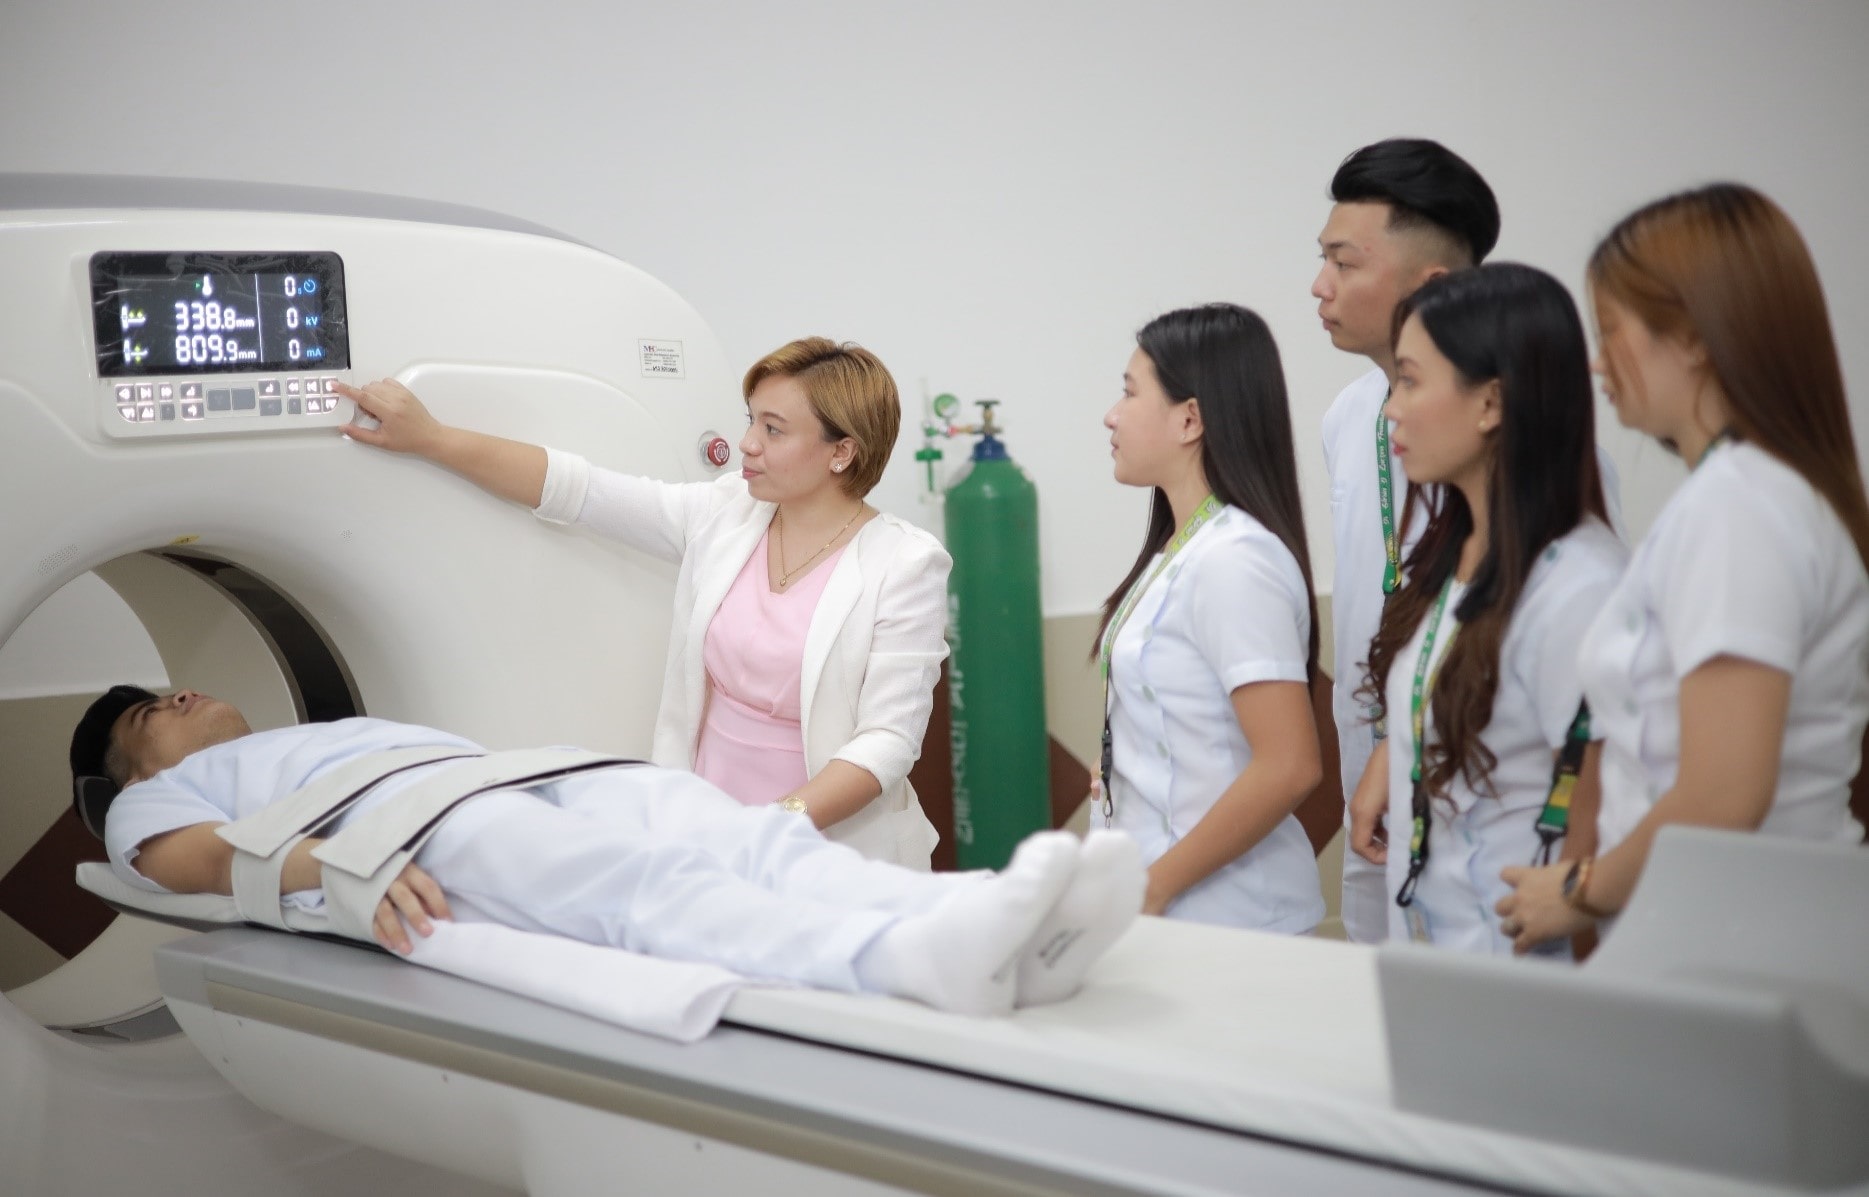 Bachelor of Science in Radiologic Technology